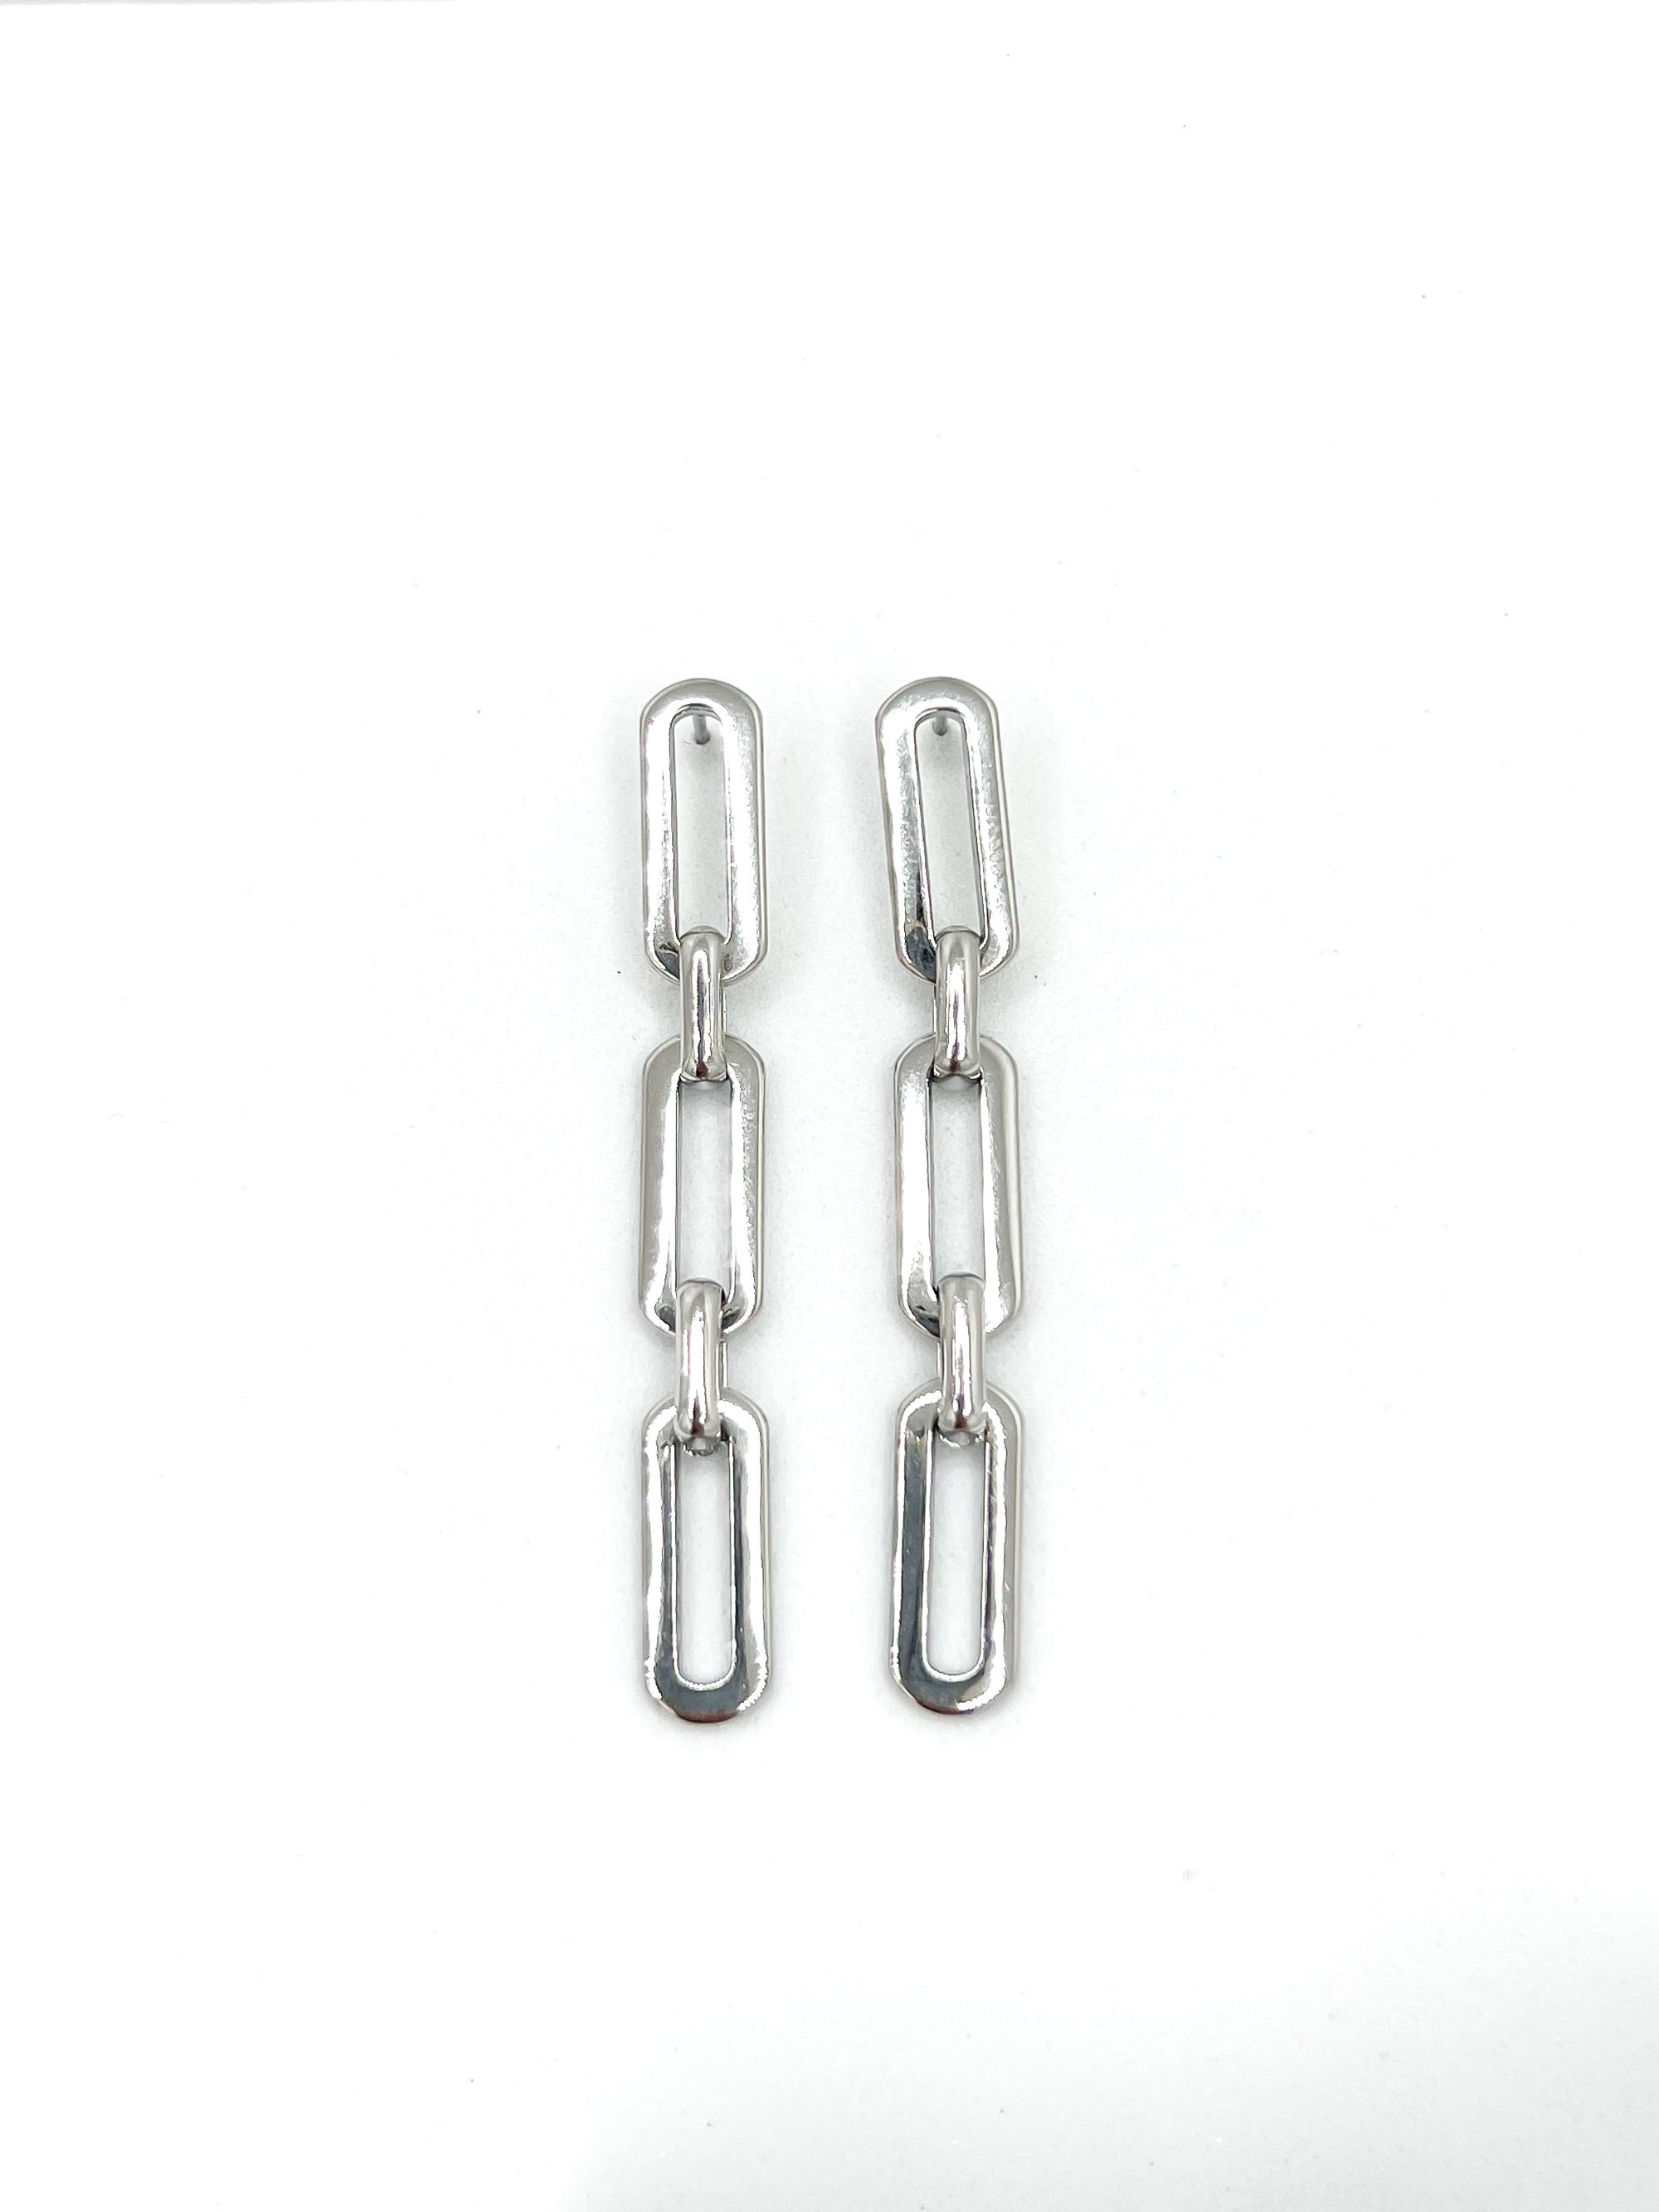 Luxe Links Earrings - For the Girls Jewelry